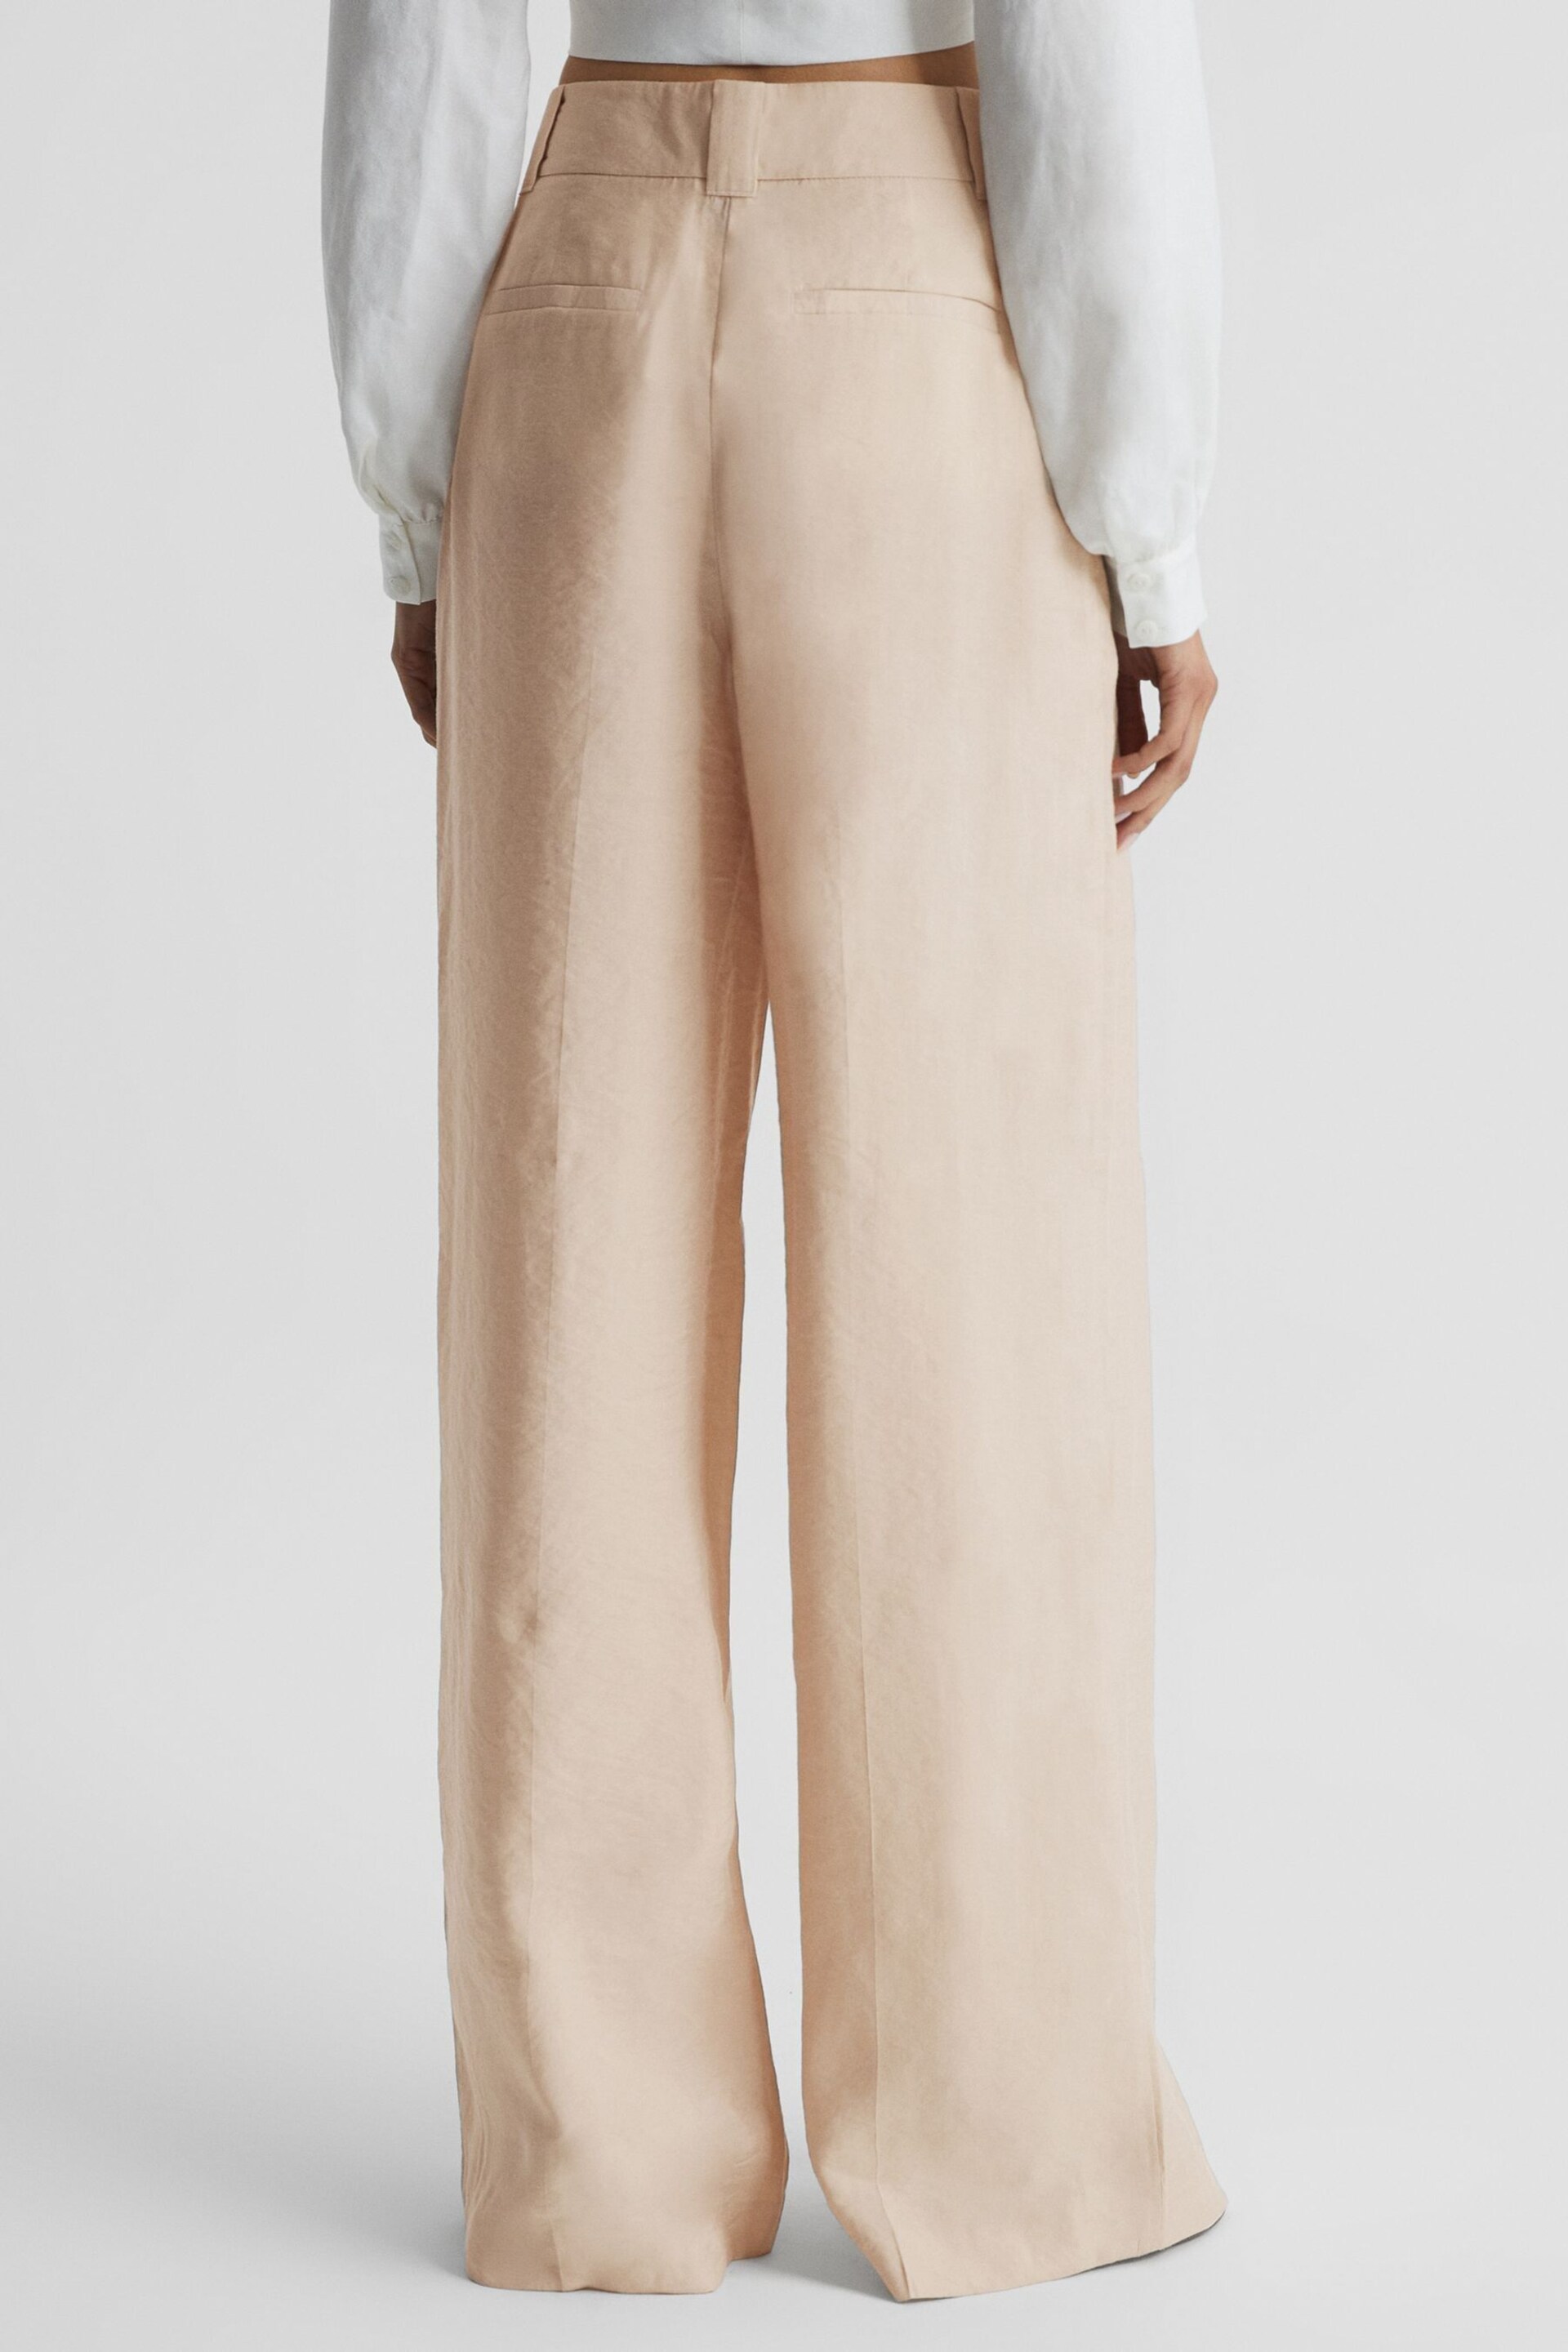 Reiss Nude Izzie Petite Wide Leg Occasion Trousers - Image 5 of 7